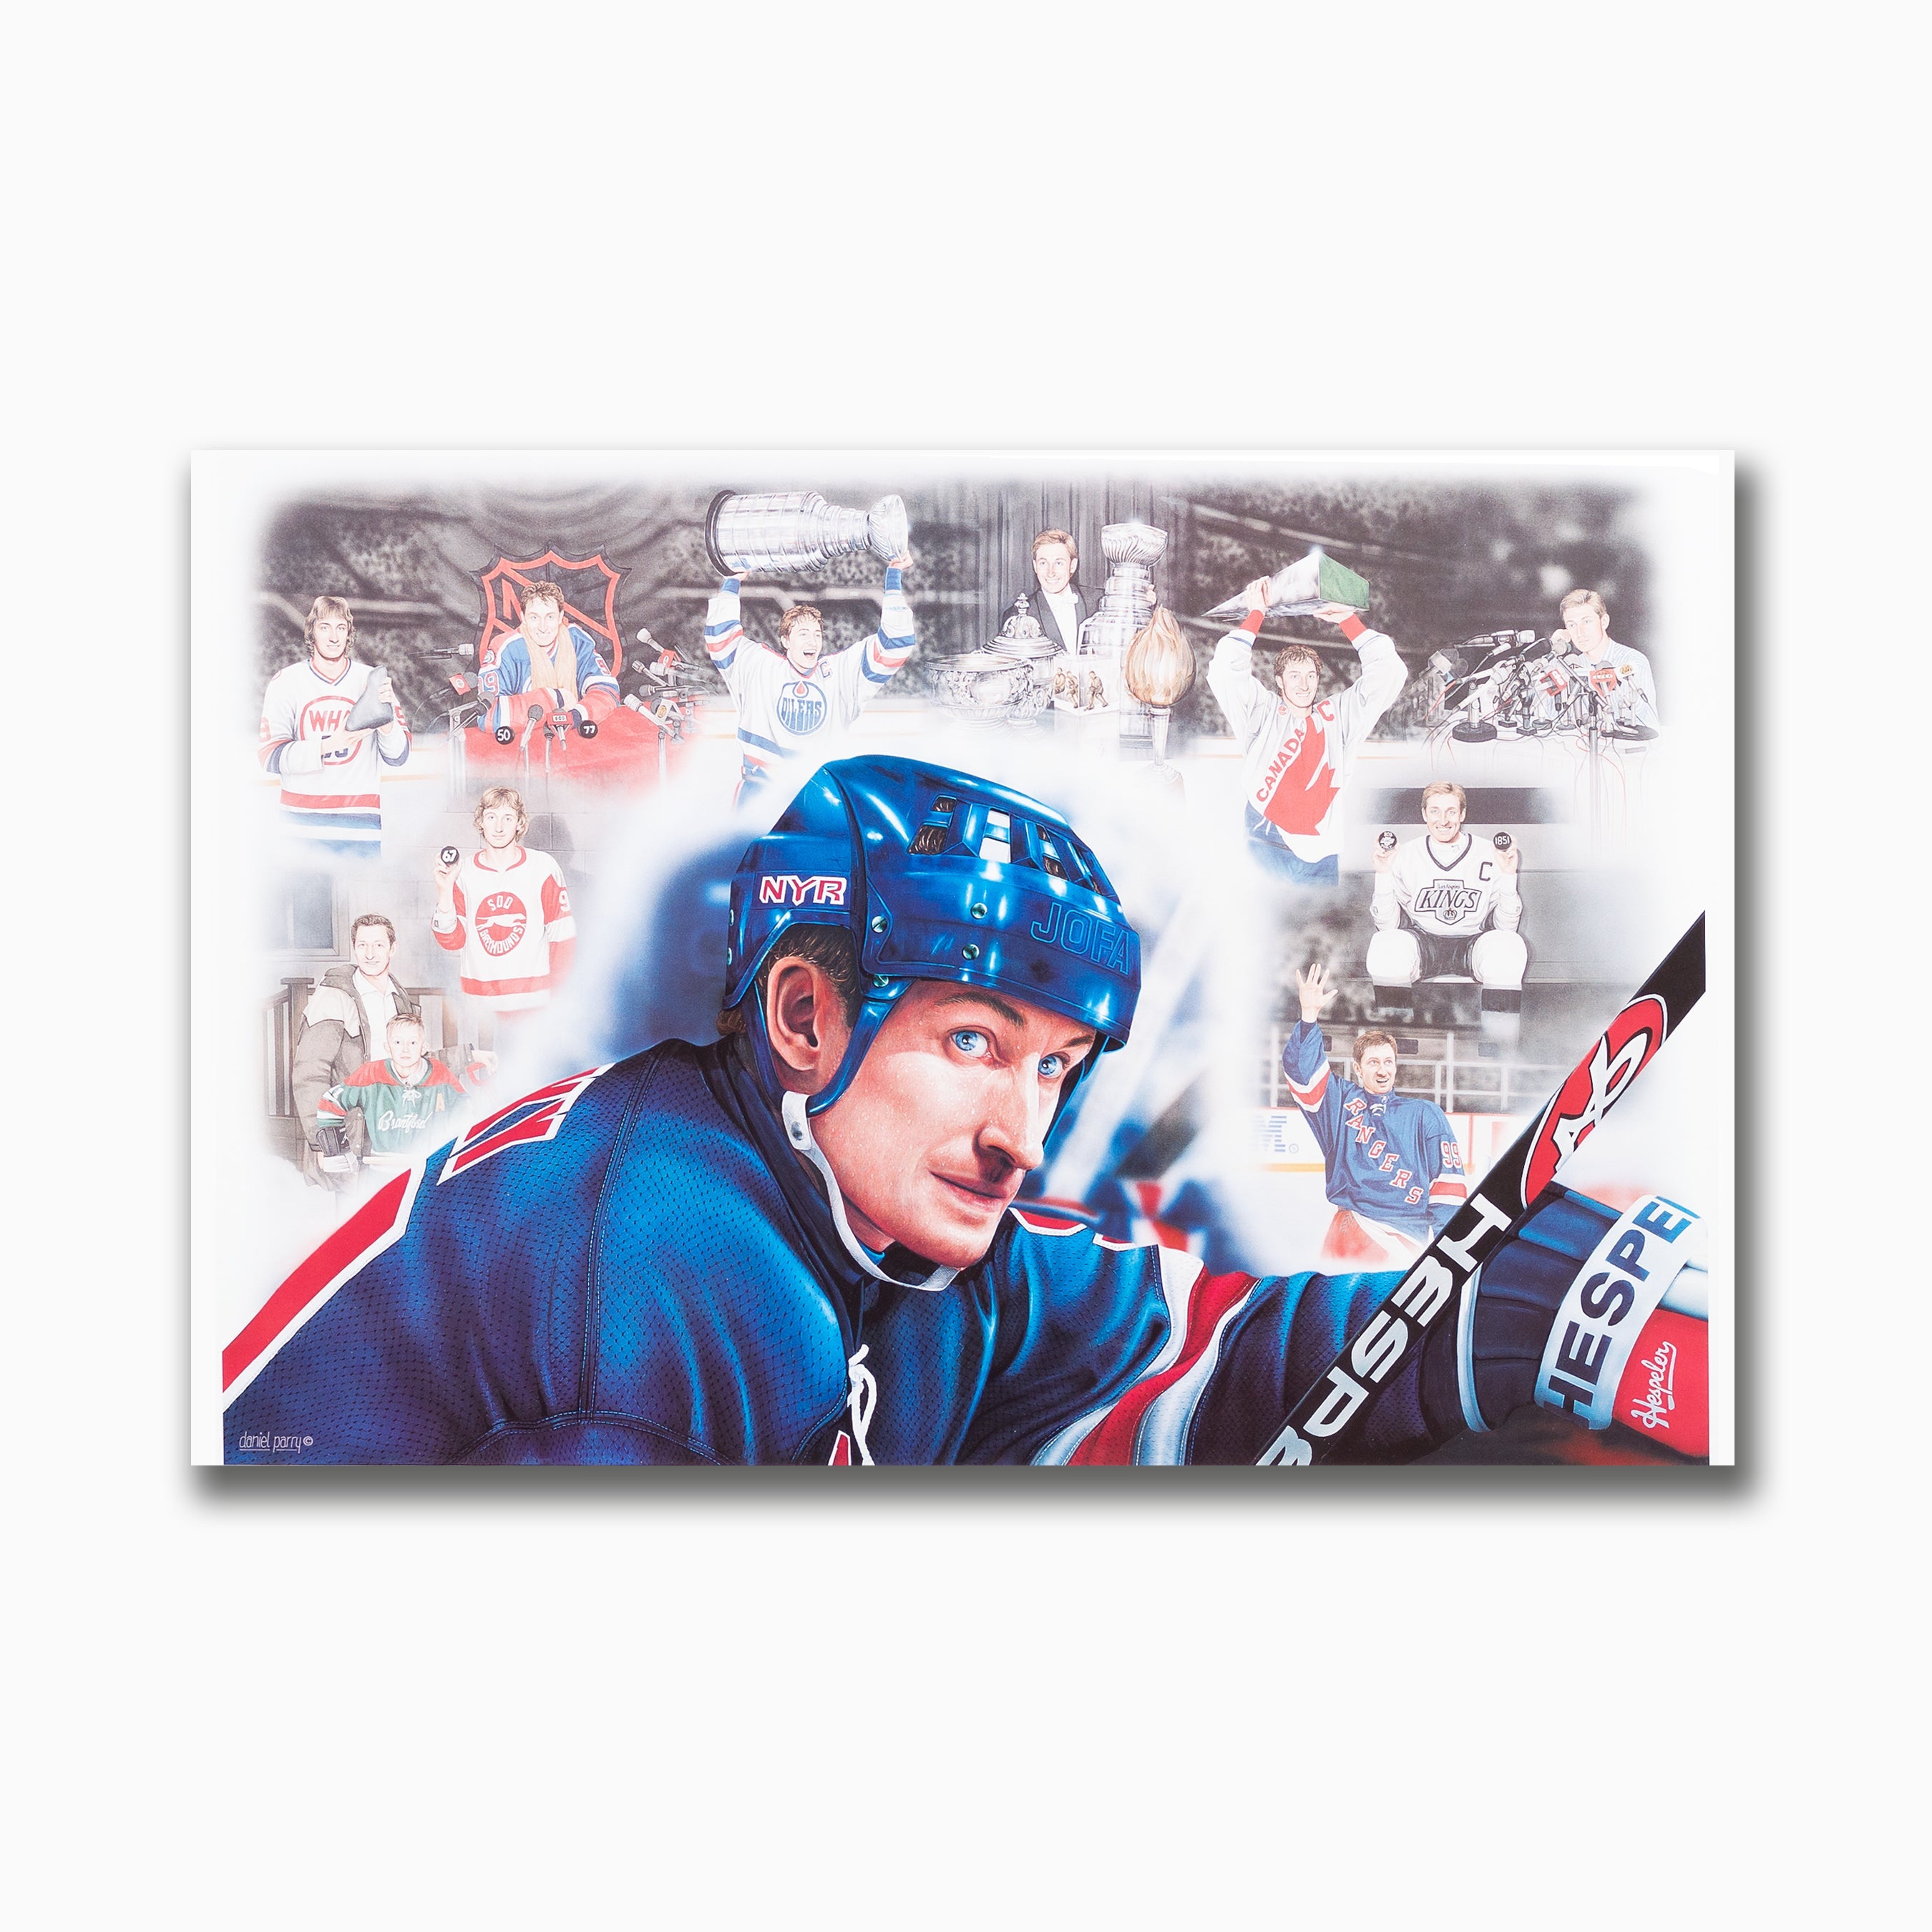 Wayne Gretzky Autographed 20th Anniversary Limited Edition 1999 HHOF Induction Print - Heritage Hockey™